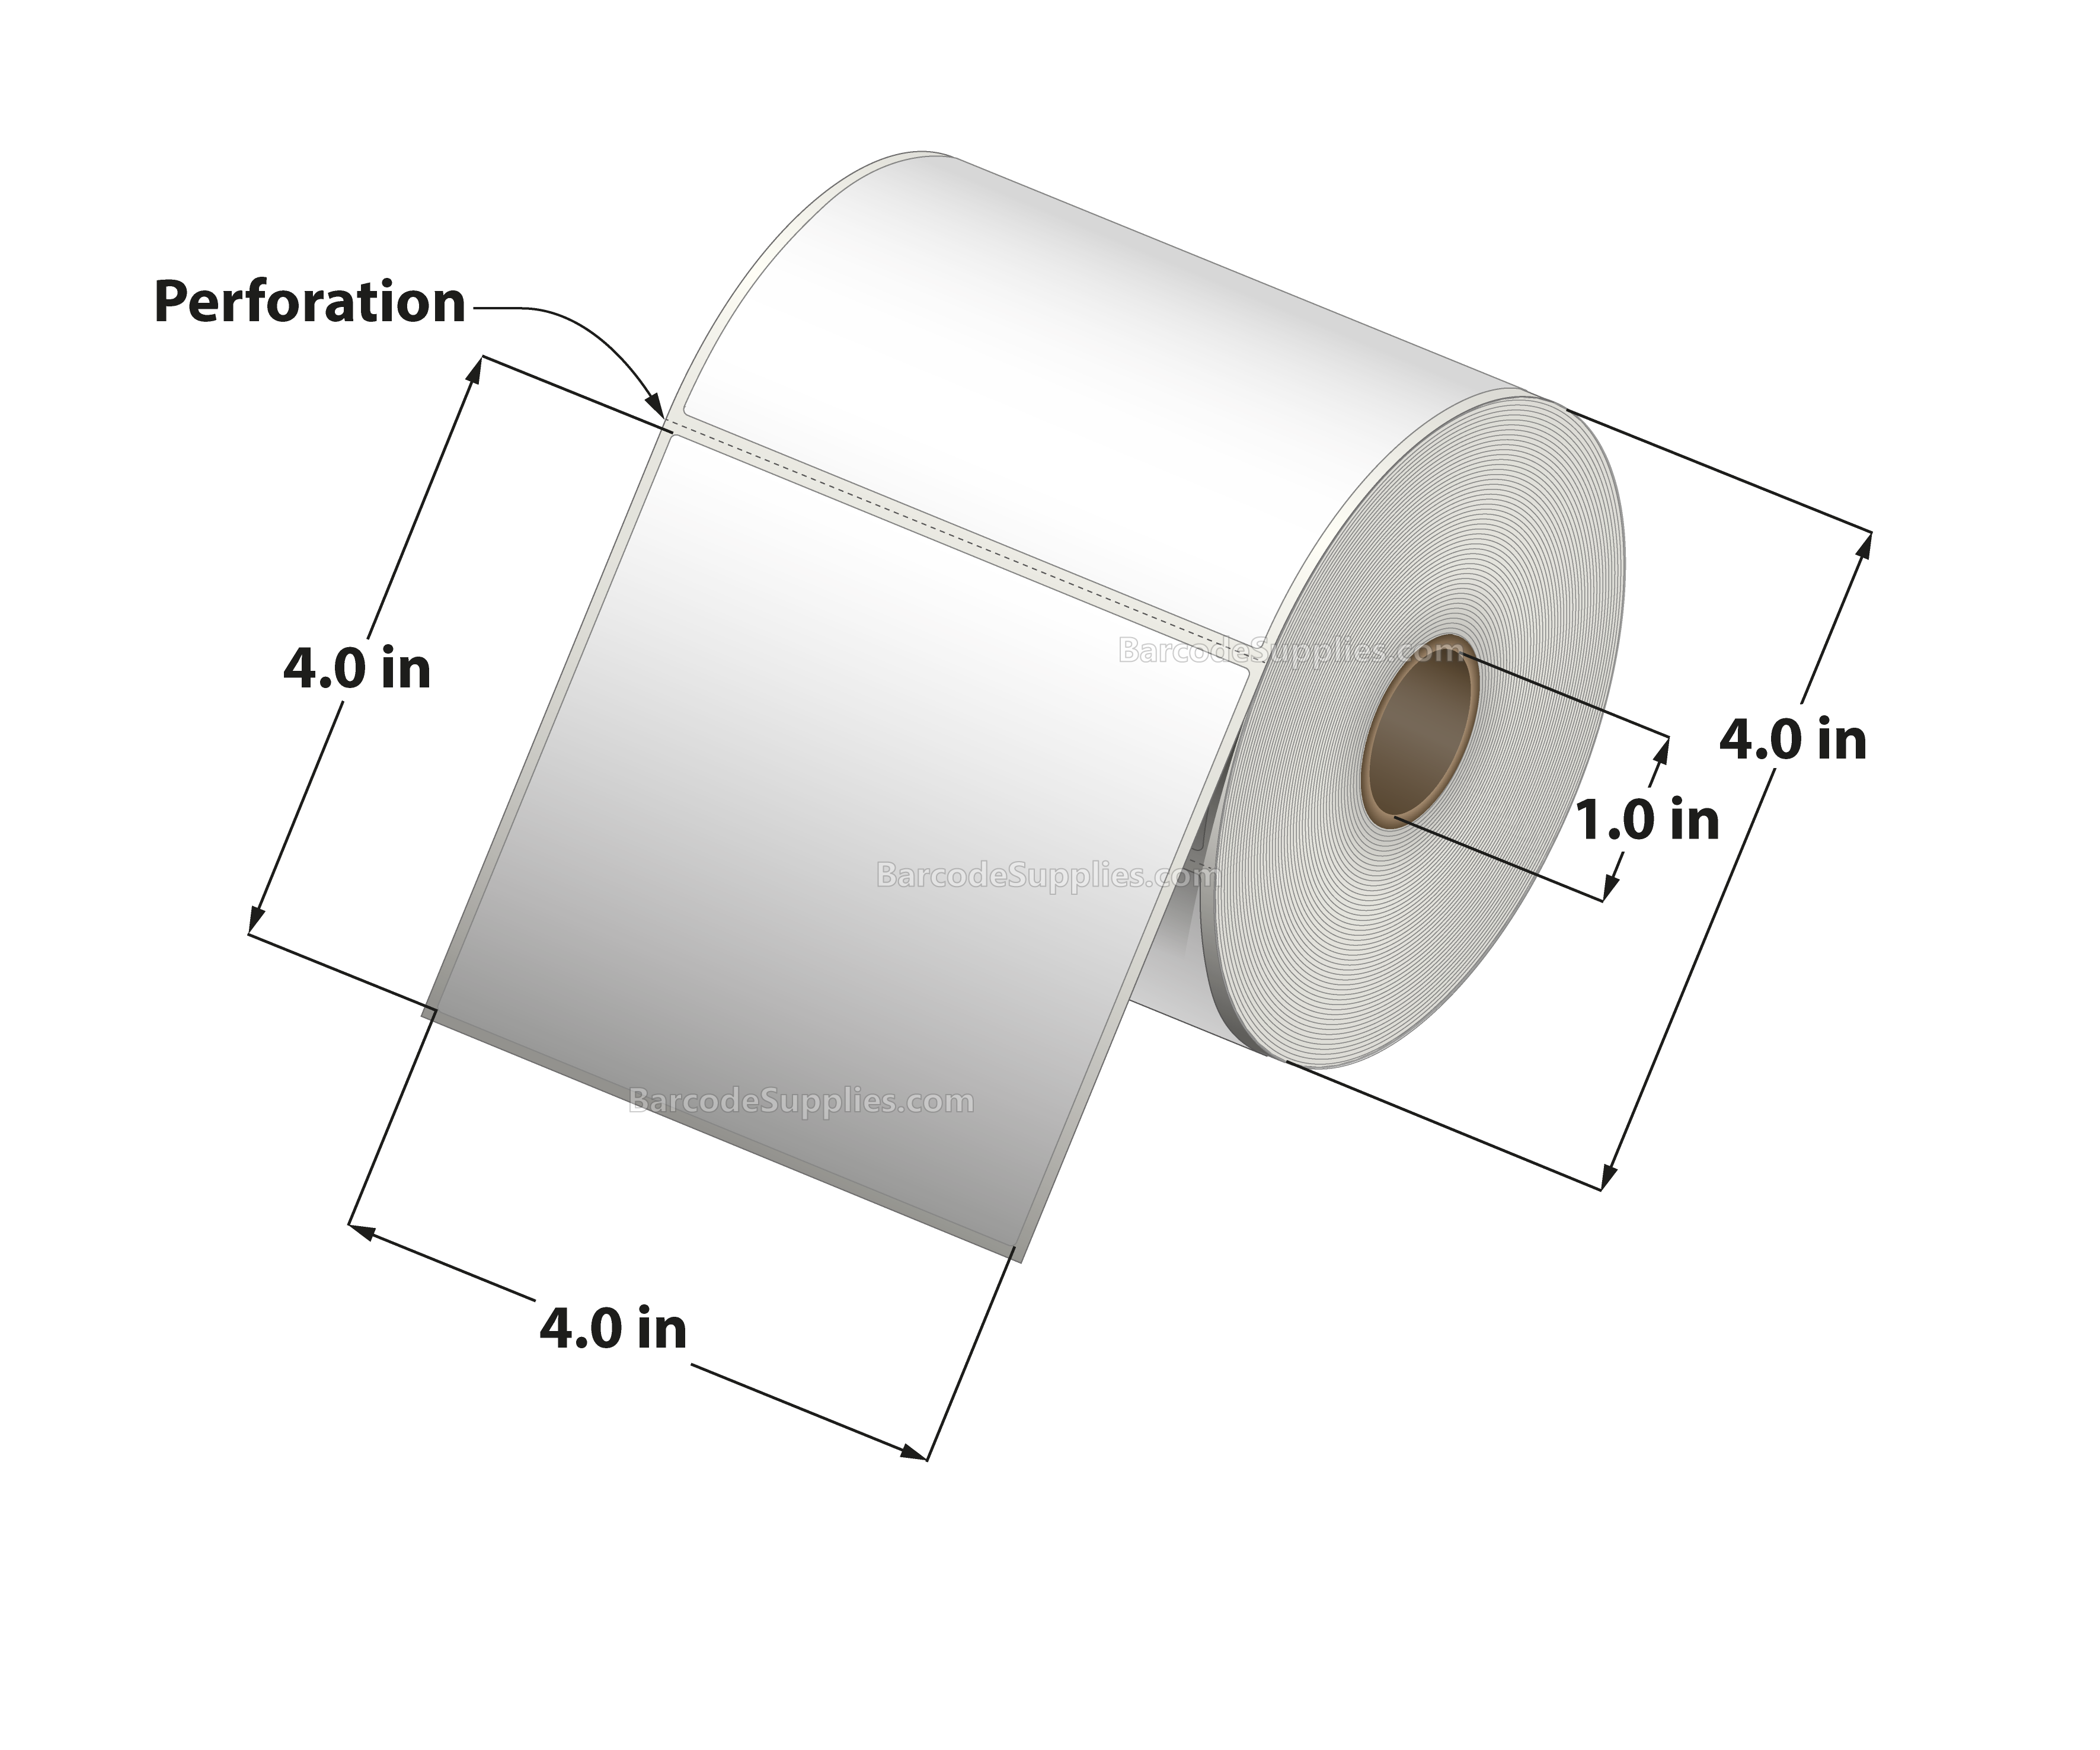 4 x 4 Thermal Transfer White Labels With Permanent Adhesive - Perforated - 380 Labels Per Roll - Carton Of 12 Rolls - 4560 Labels Total - MPN: RT-4-4-380-1 - BarcodeSource, Inc.